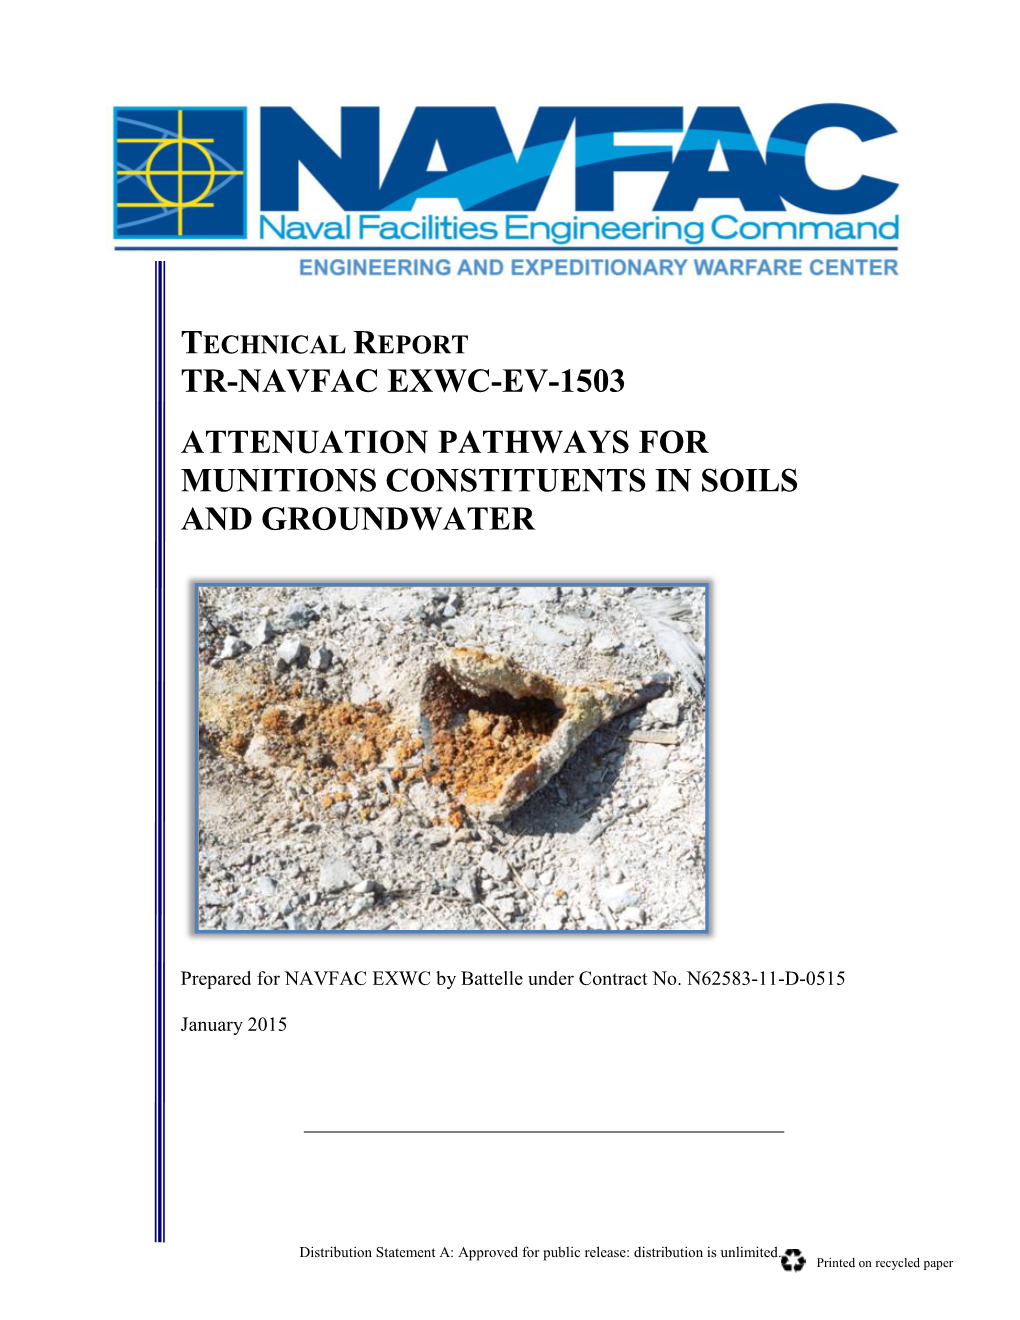 Attenuation Pathways for Munitions Constituents in Soils and Groundwater Attenuation Pathways for Munitions Constituents In